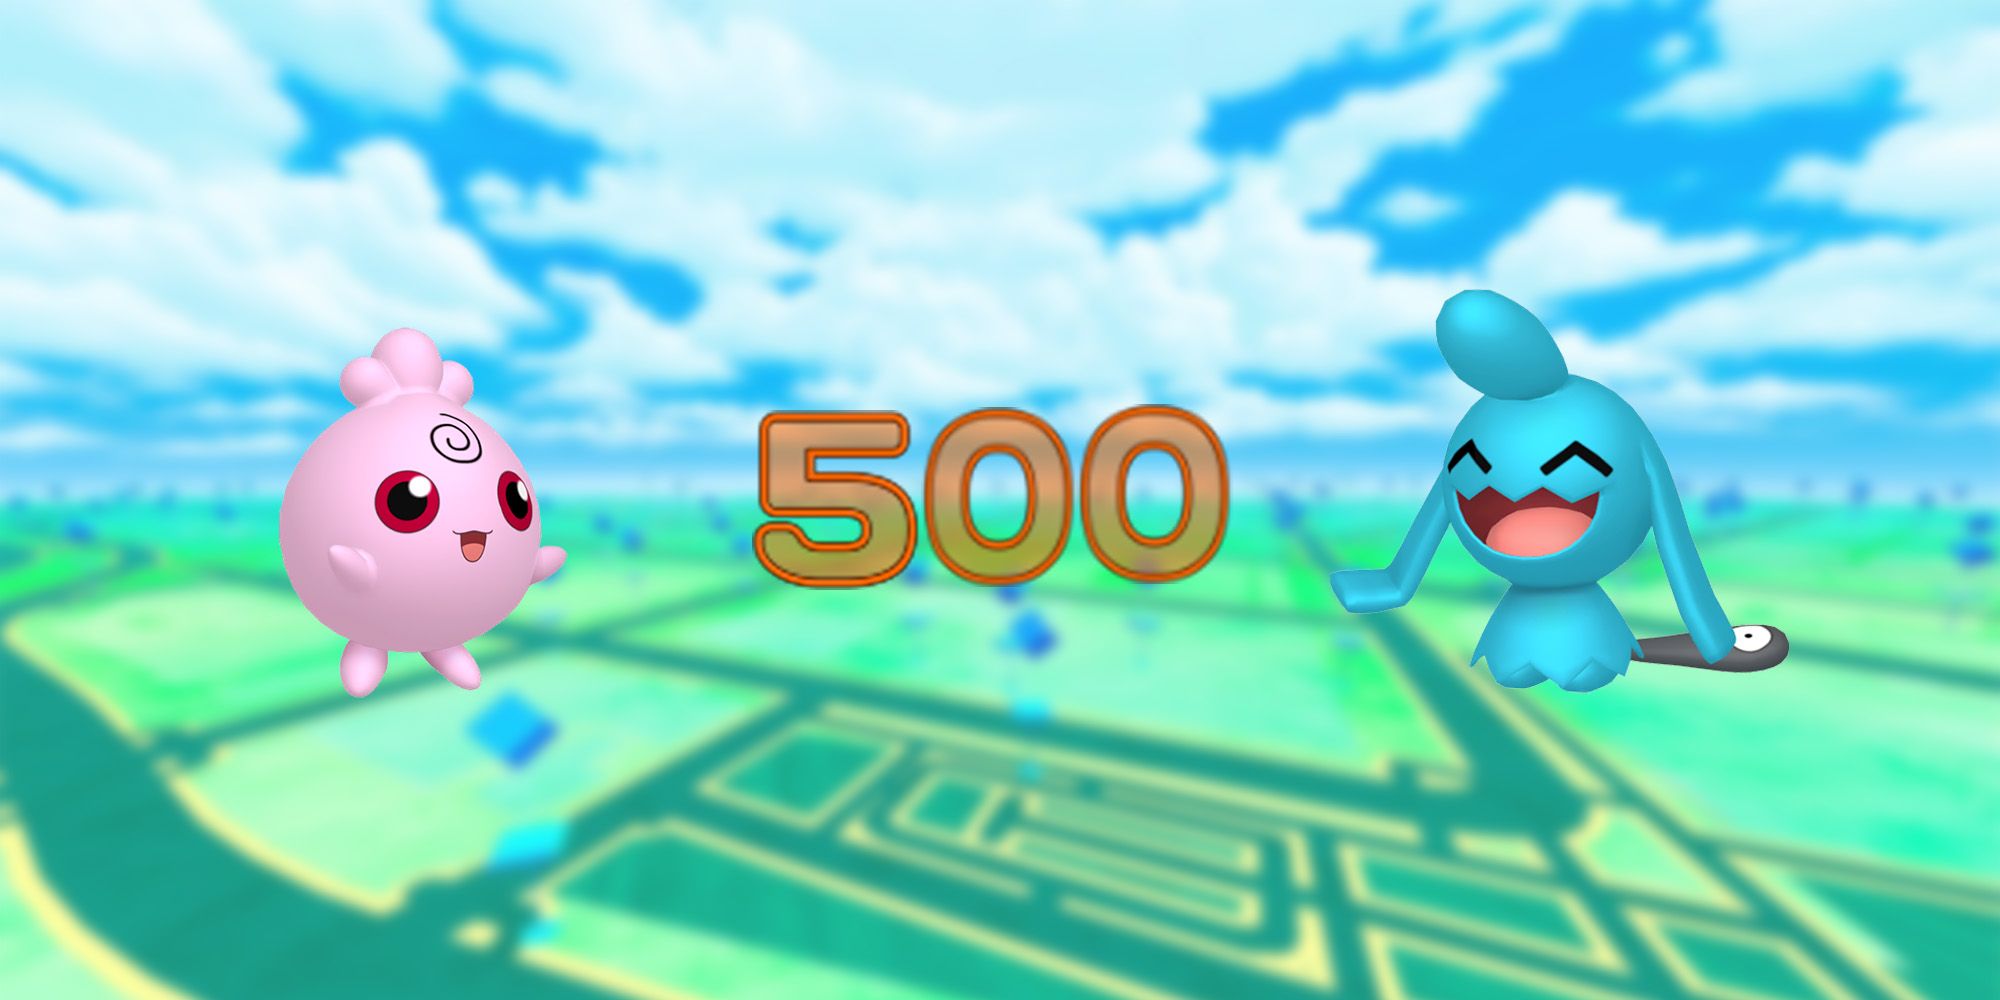 Igglybuff and Wynaut on a Pokemon Go map with 500 indicating the CP limit for Little Cup.